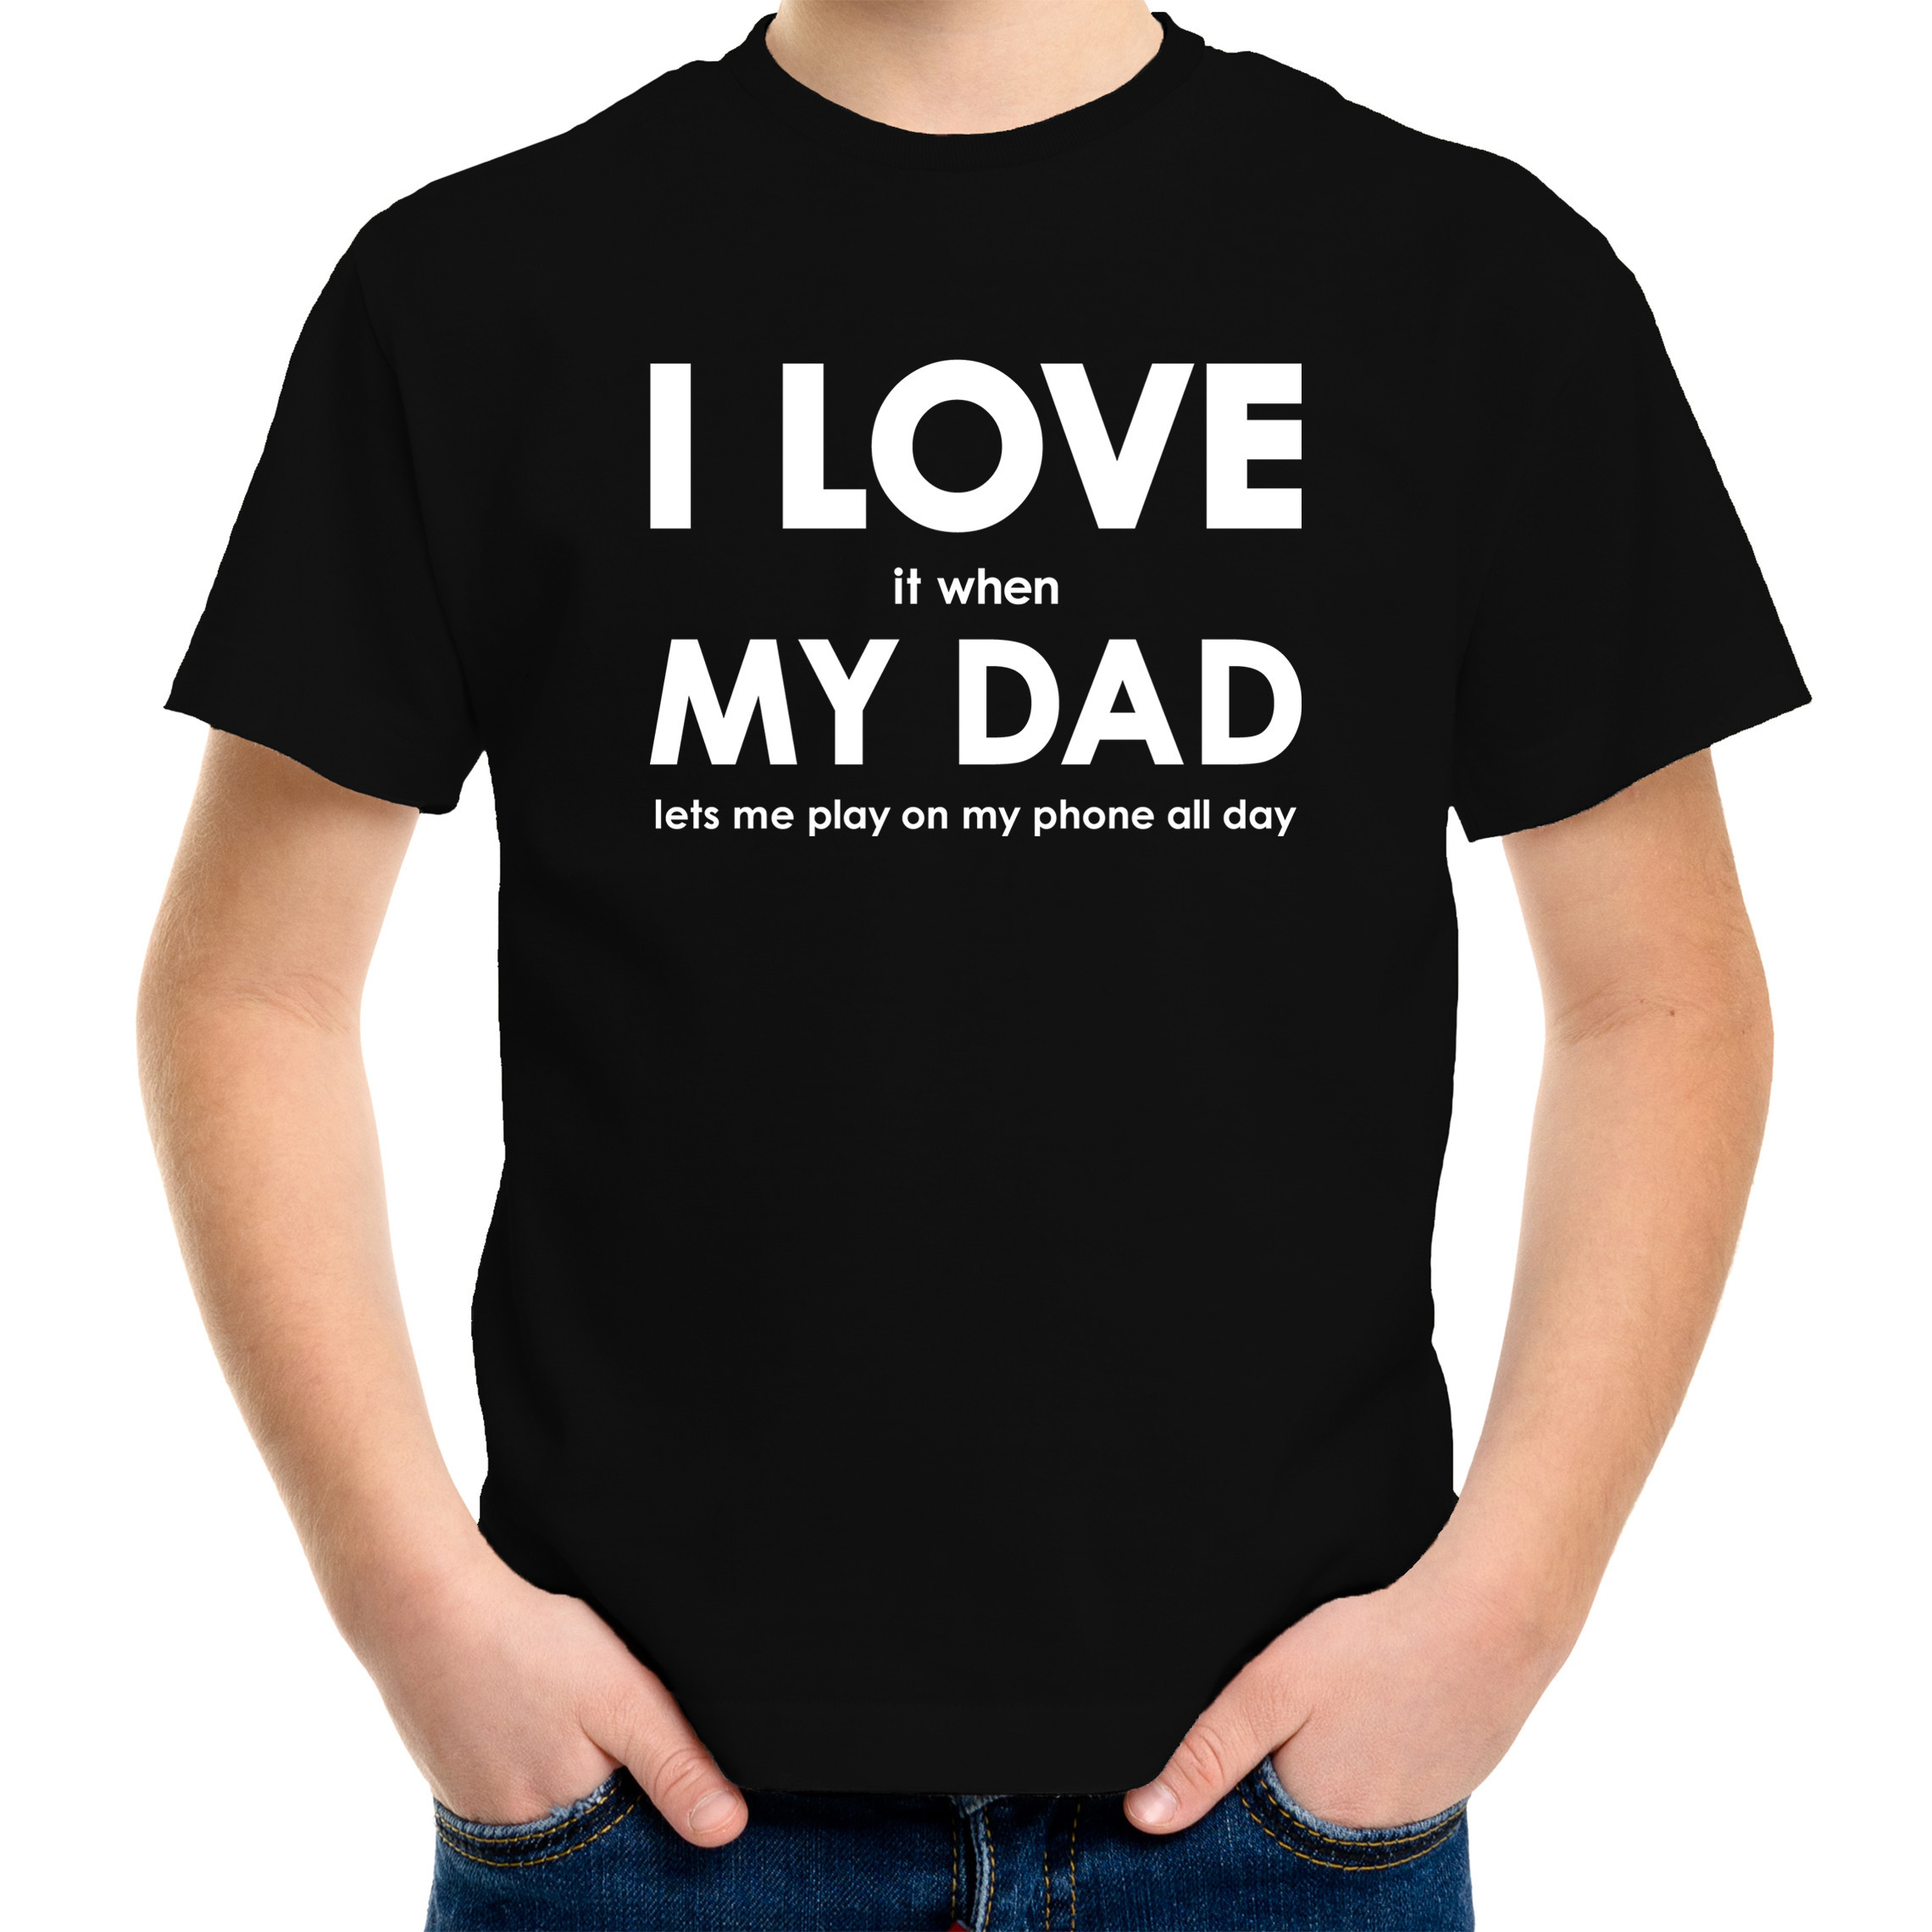 I love it when my dad lets me play on my phone all day t-shirt zwart voor kids